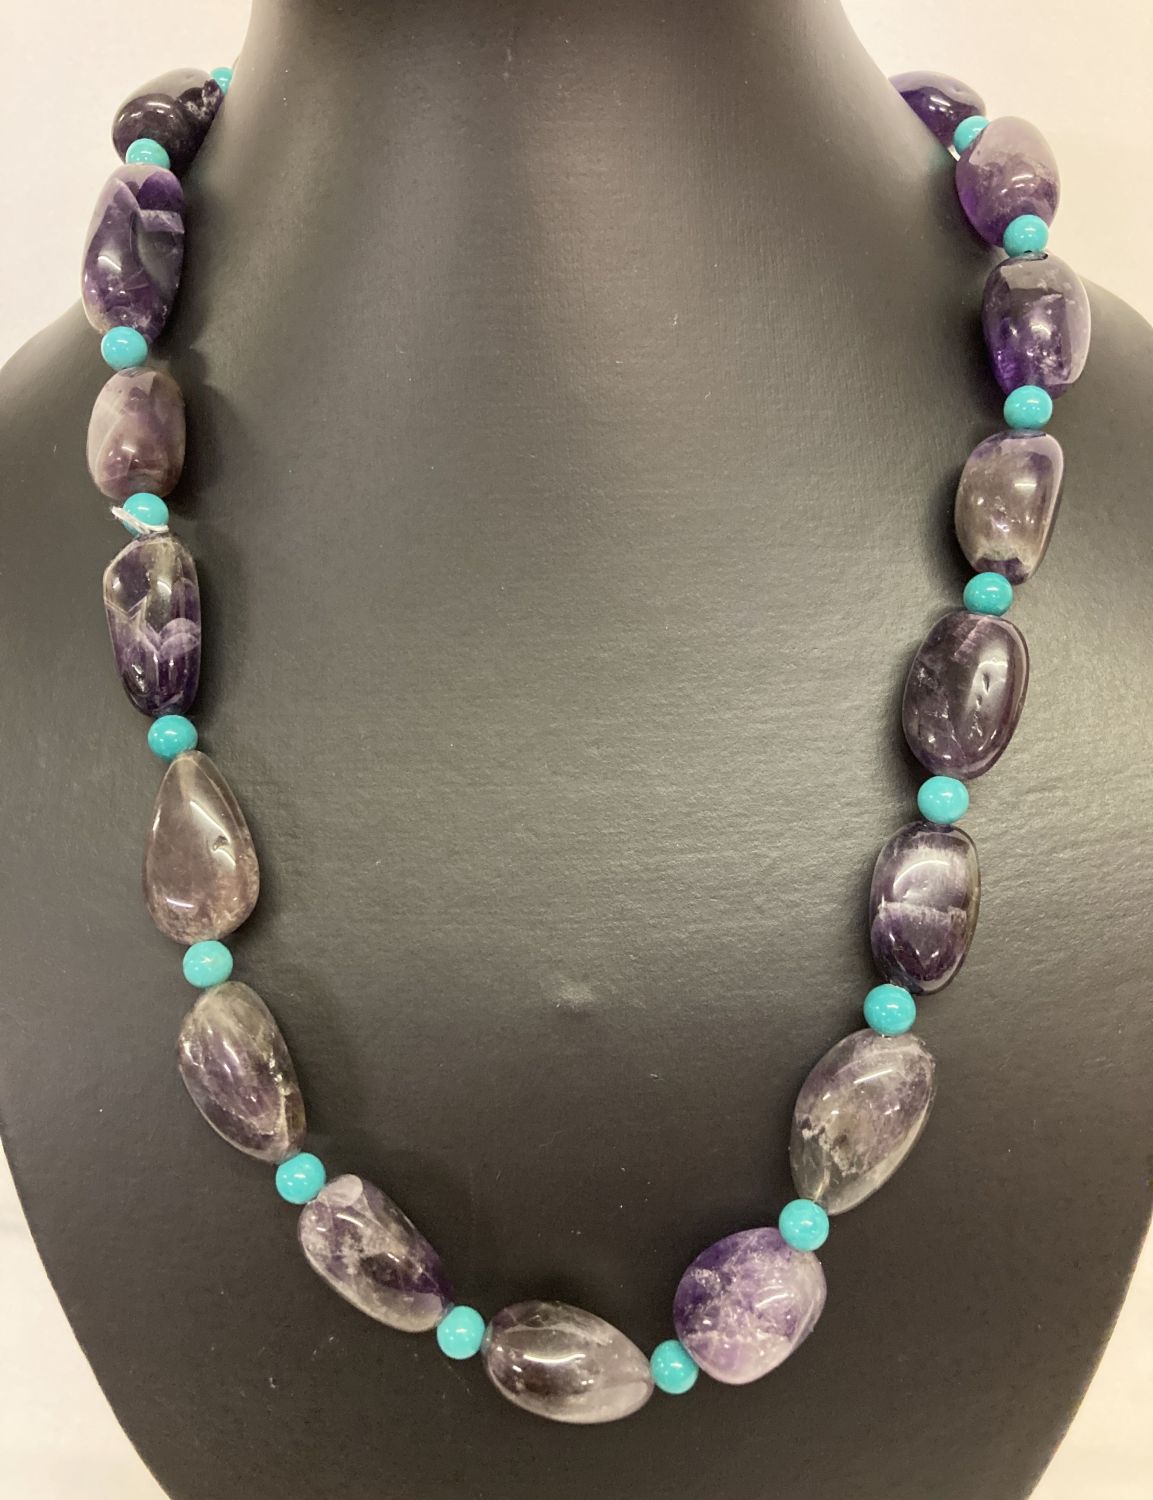 A 20" amethyst and turquoise beaded necklace with white metal S shaped clasp.